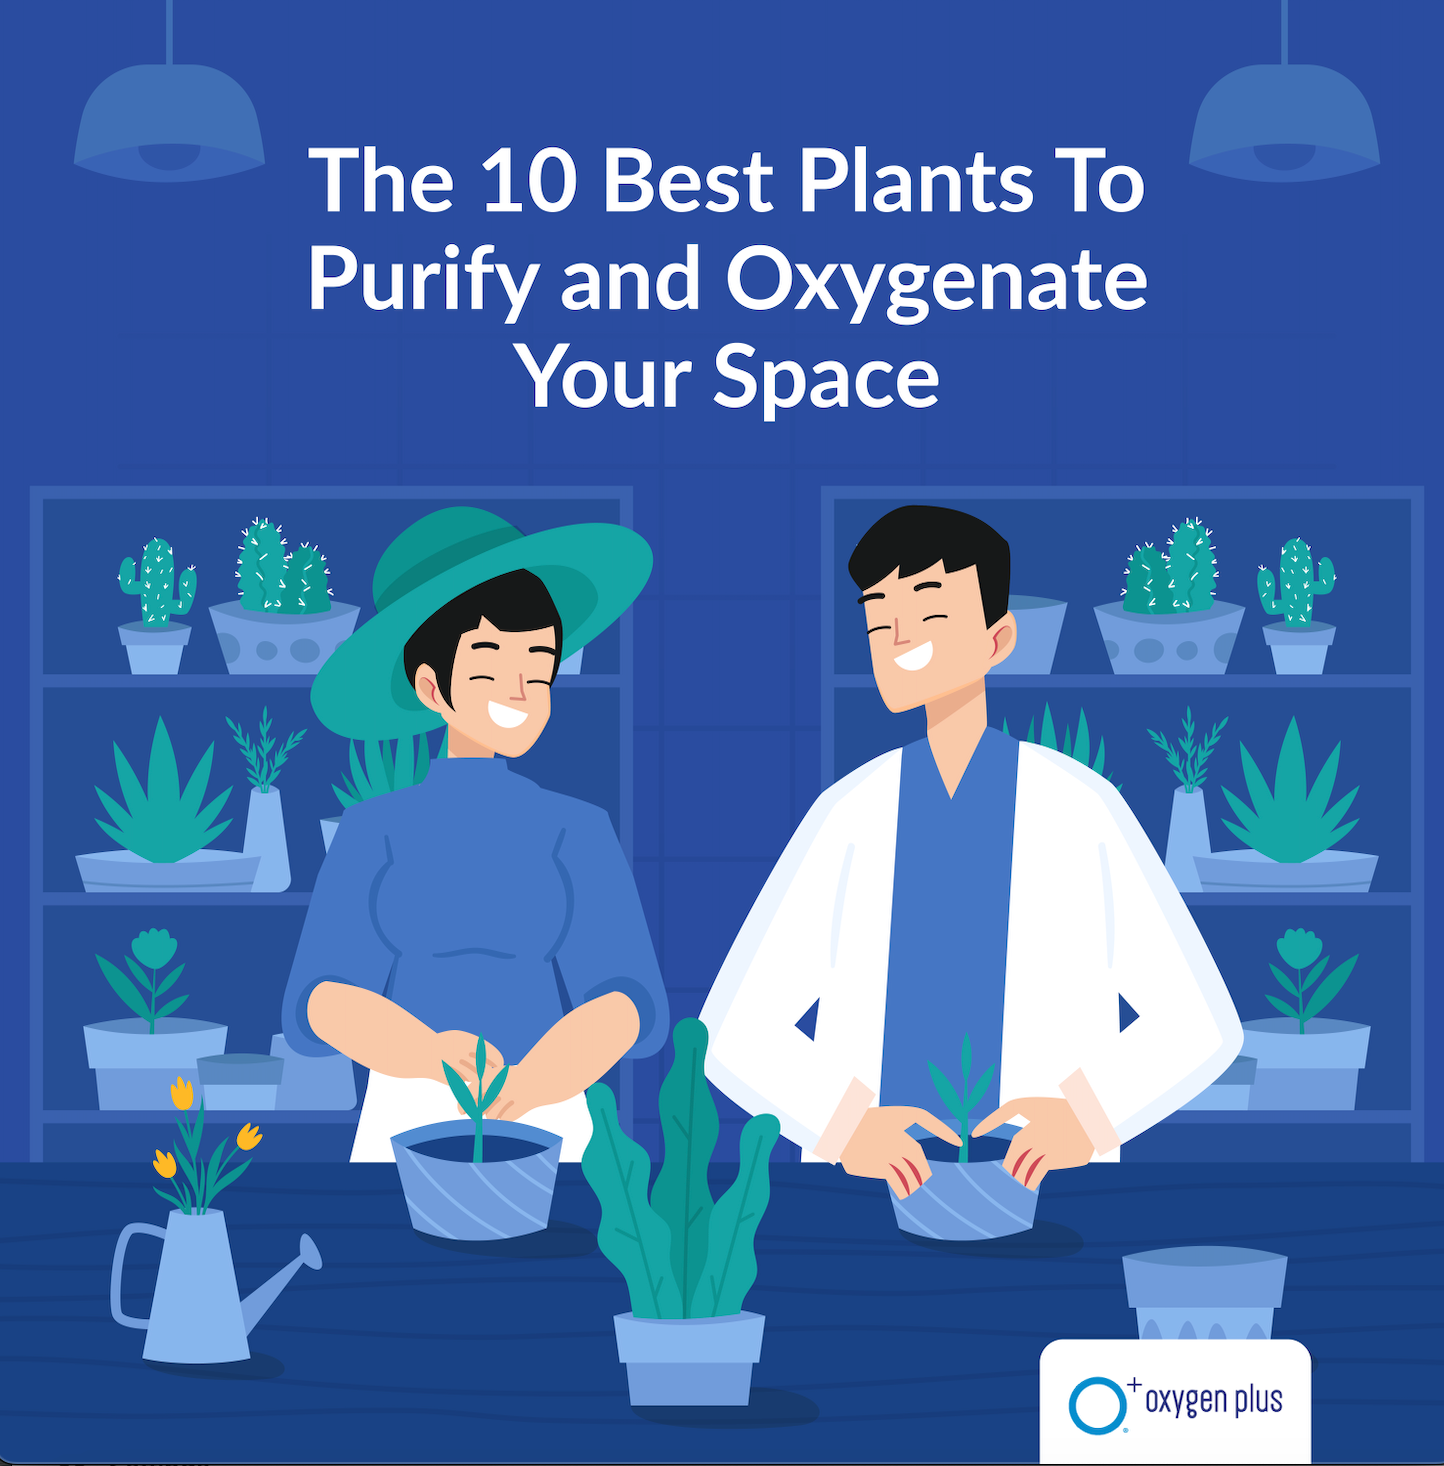 The 10 best plant to purify and oxygenate your space